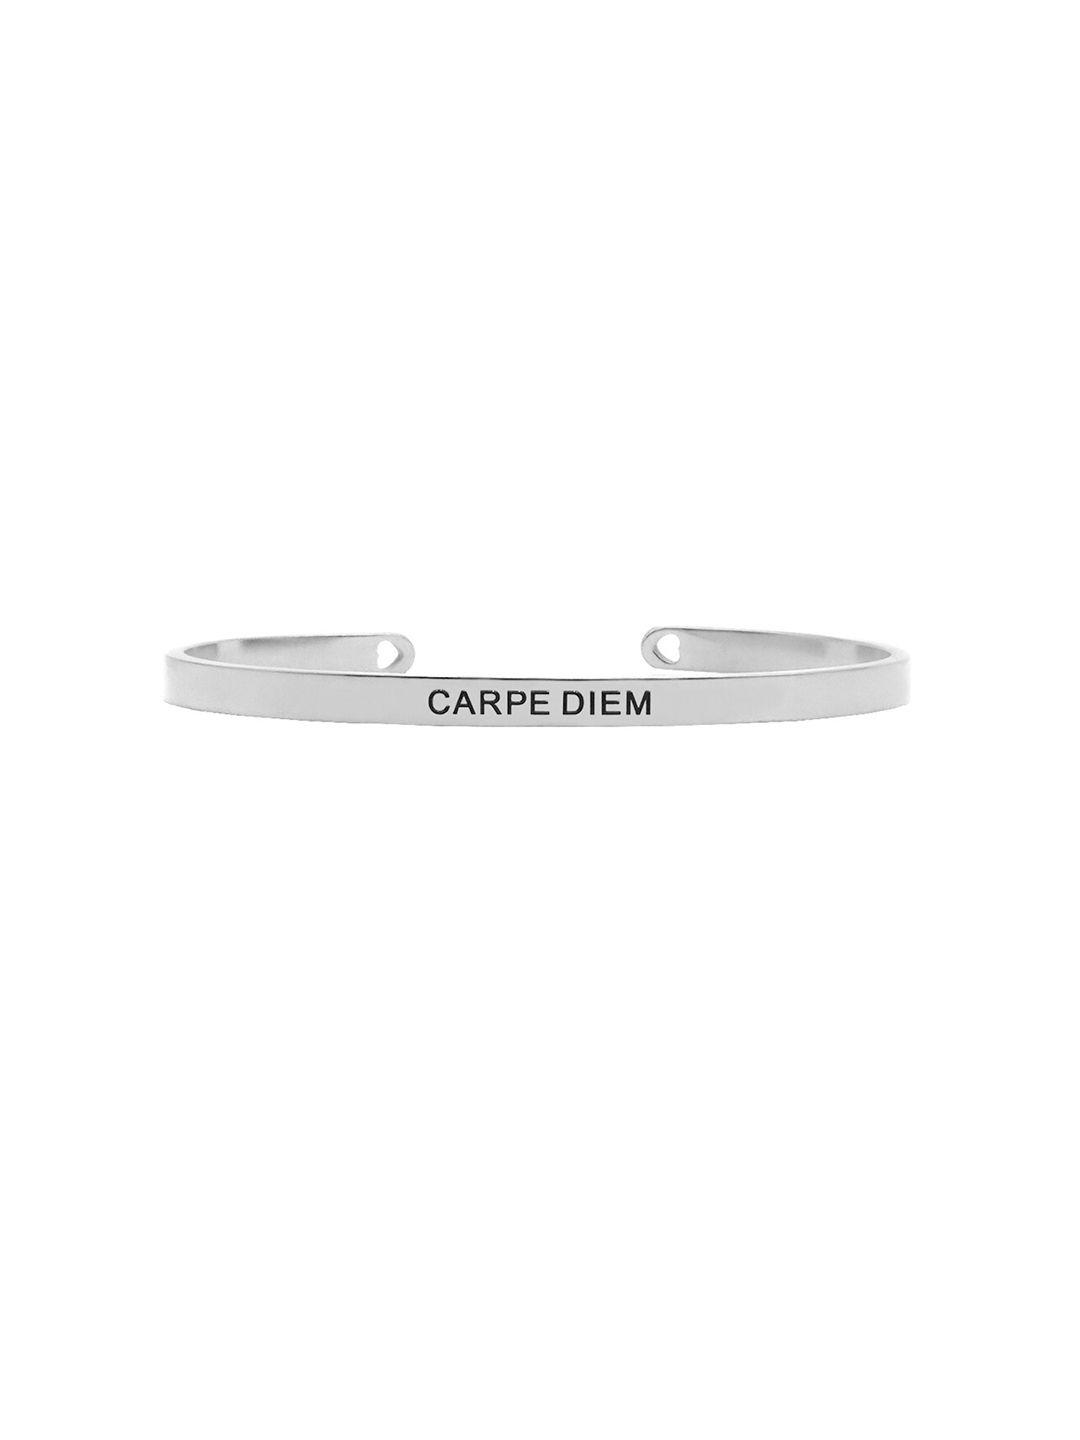 joker & witch silver-plated stainless steel carpe diem mantra band